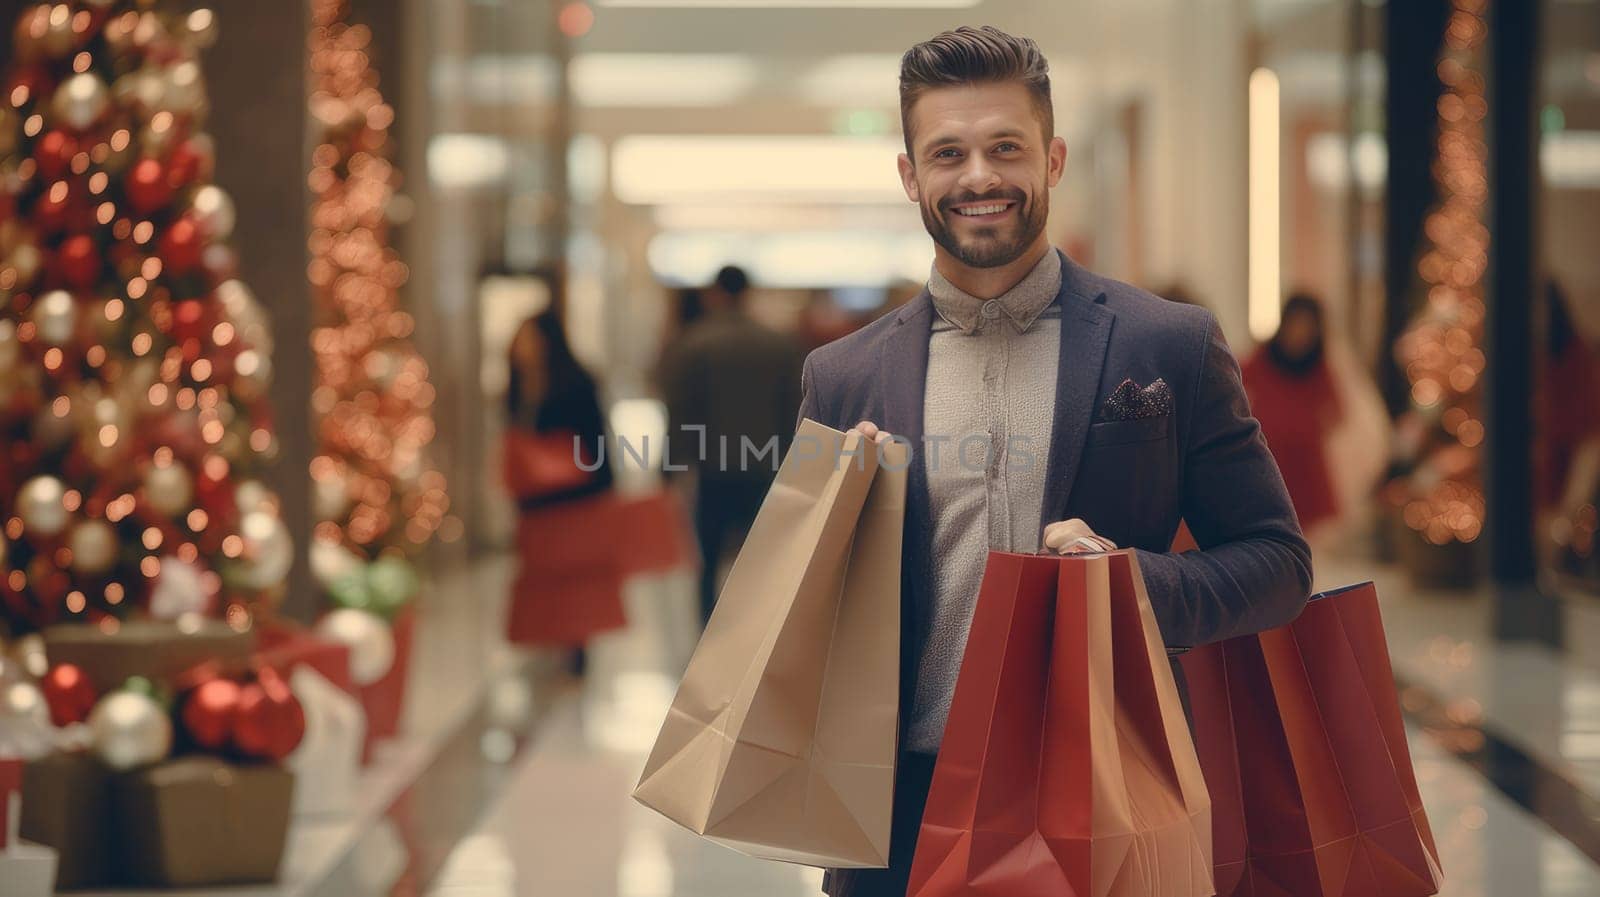 Smiling man with Christmas gifts in shopping bags in a shopping mall. Christmas sale concept by Alla_Yurtayeva